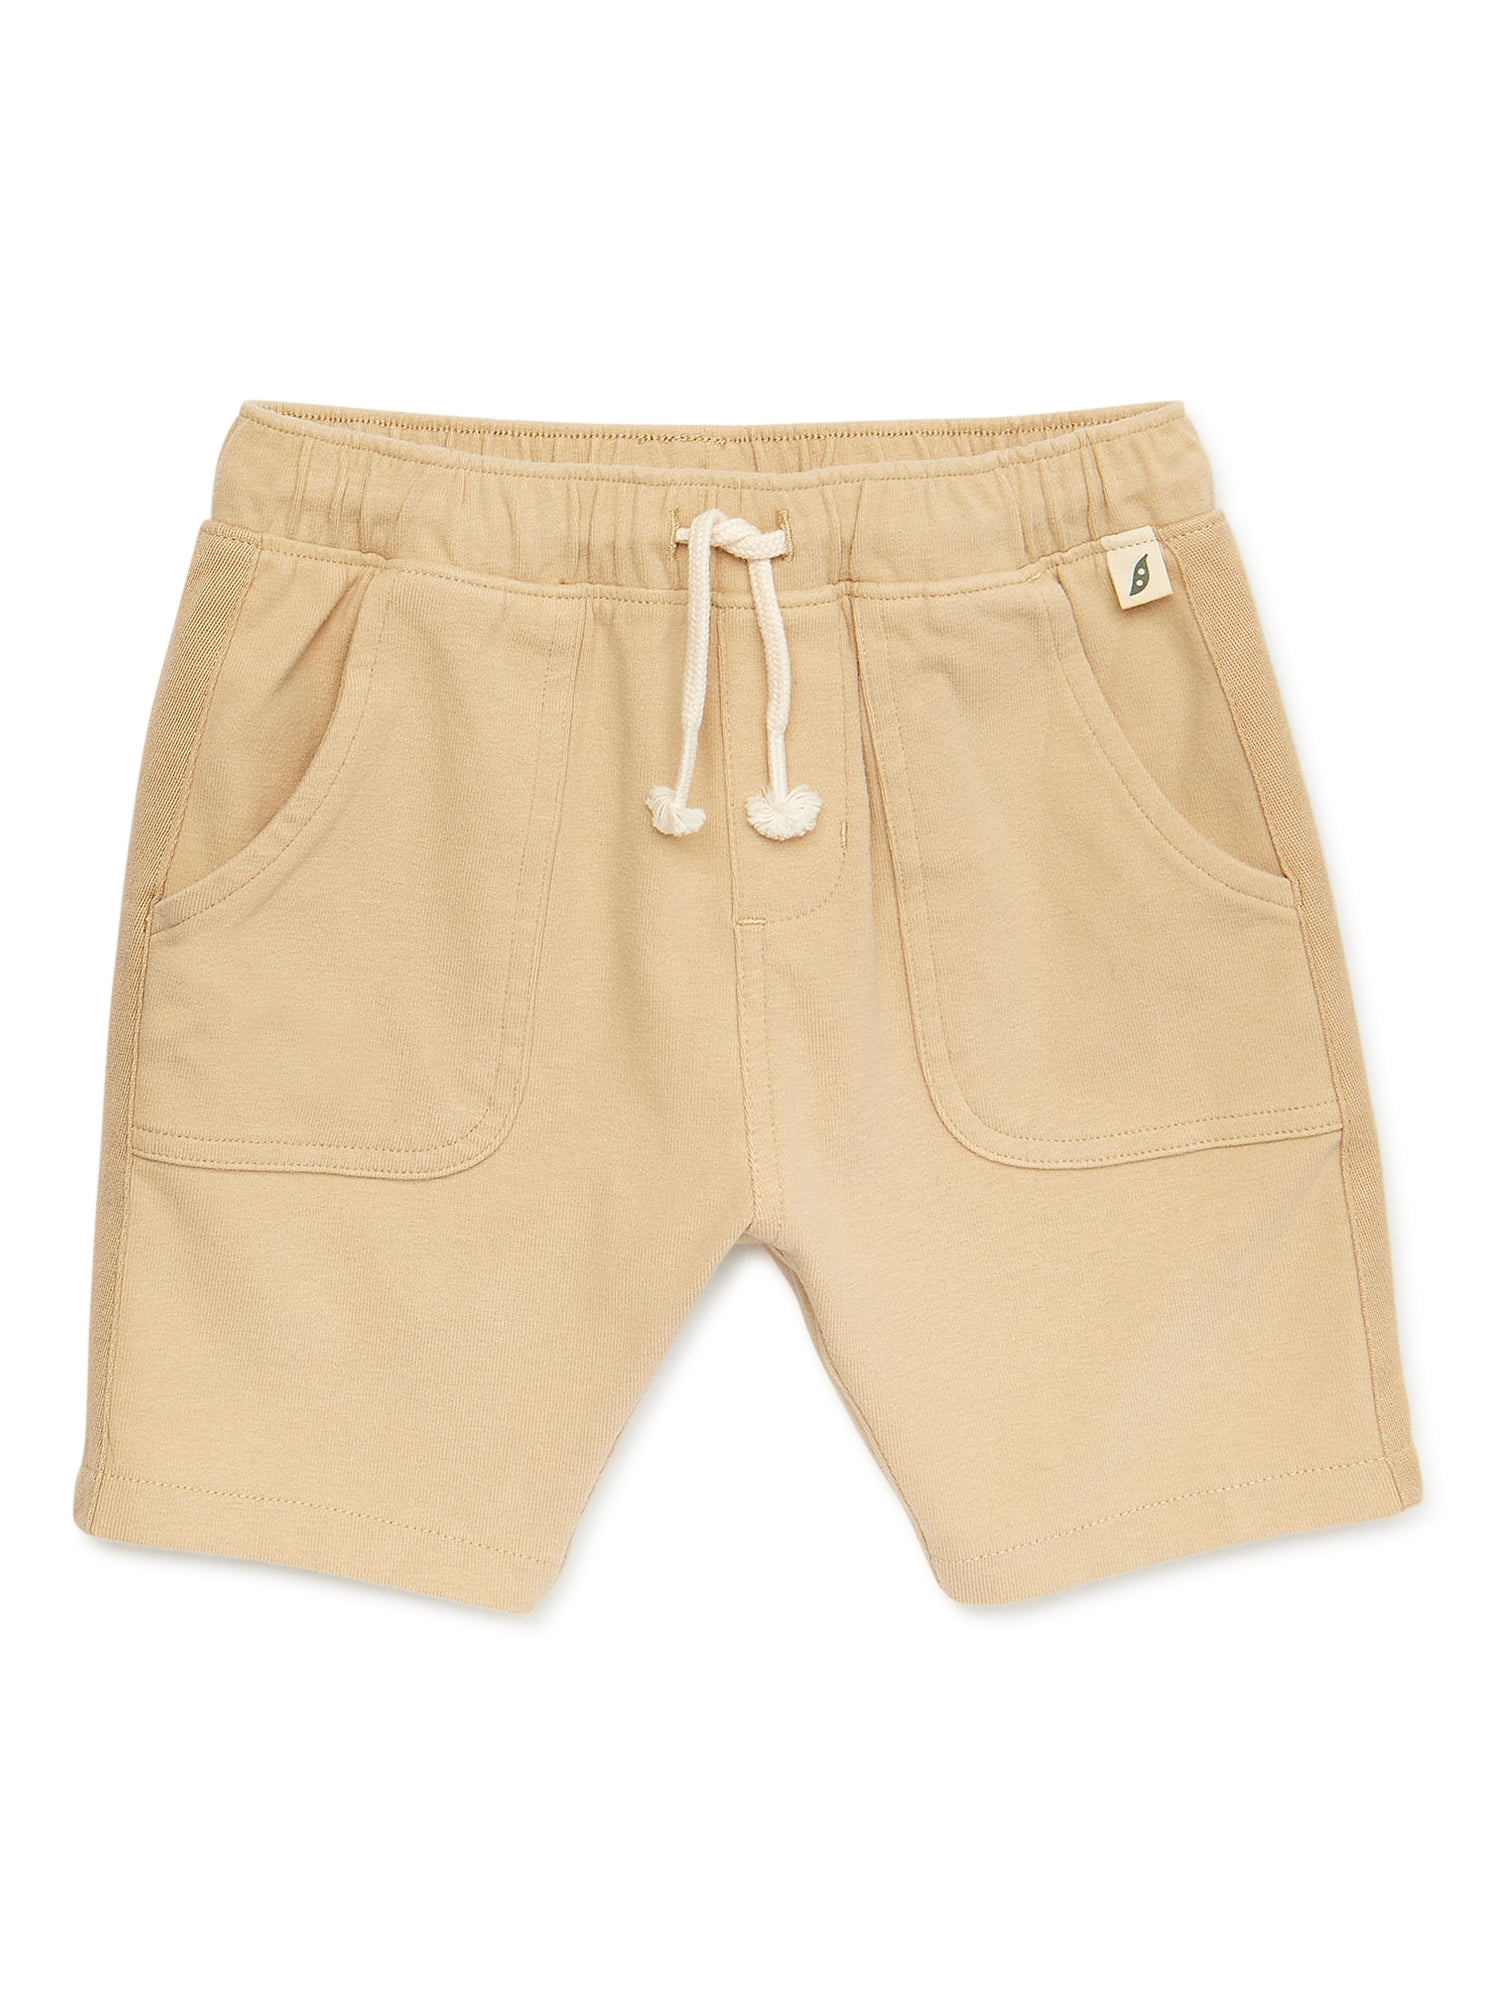 easy-peasy Toddler Boy French Terry Porkchop Shorts, Sizes 12M-5T